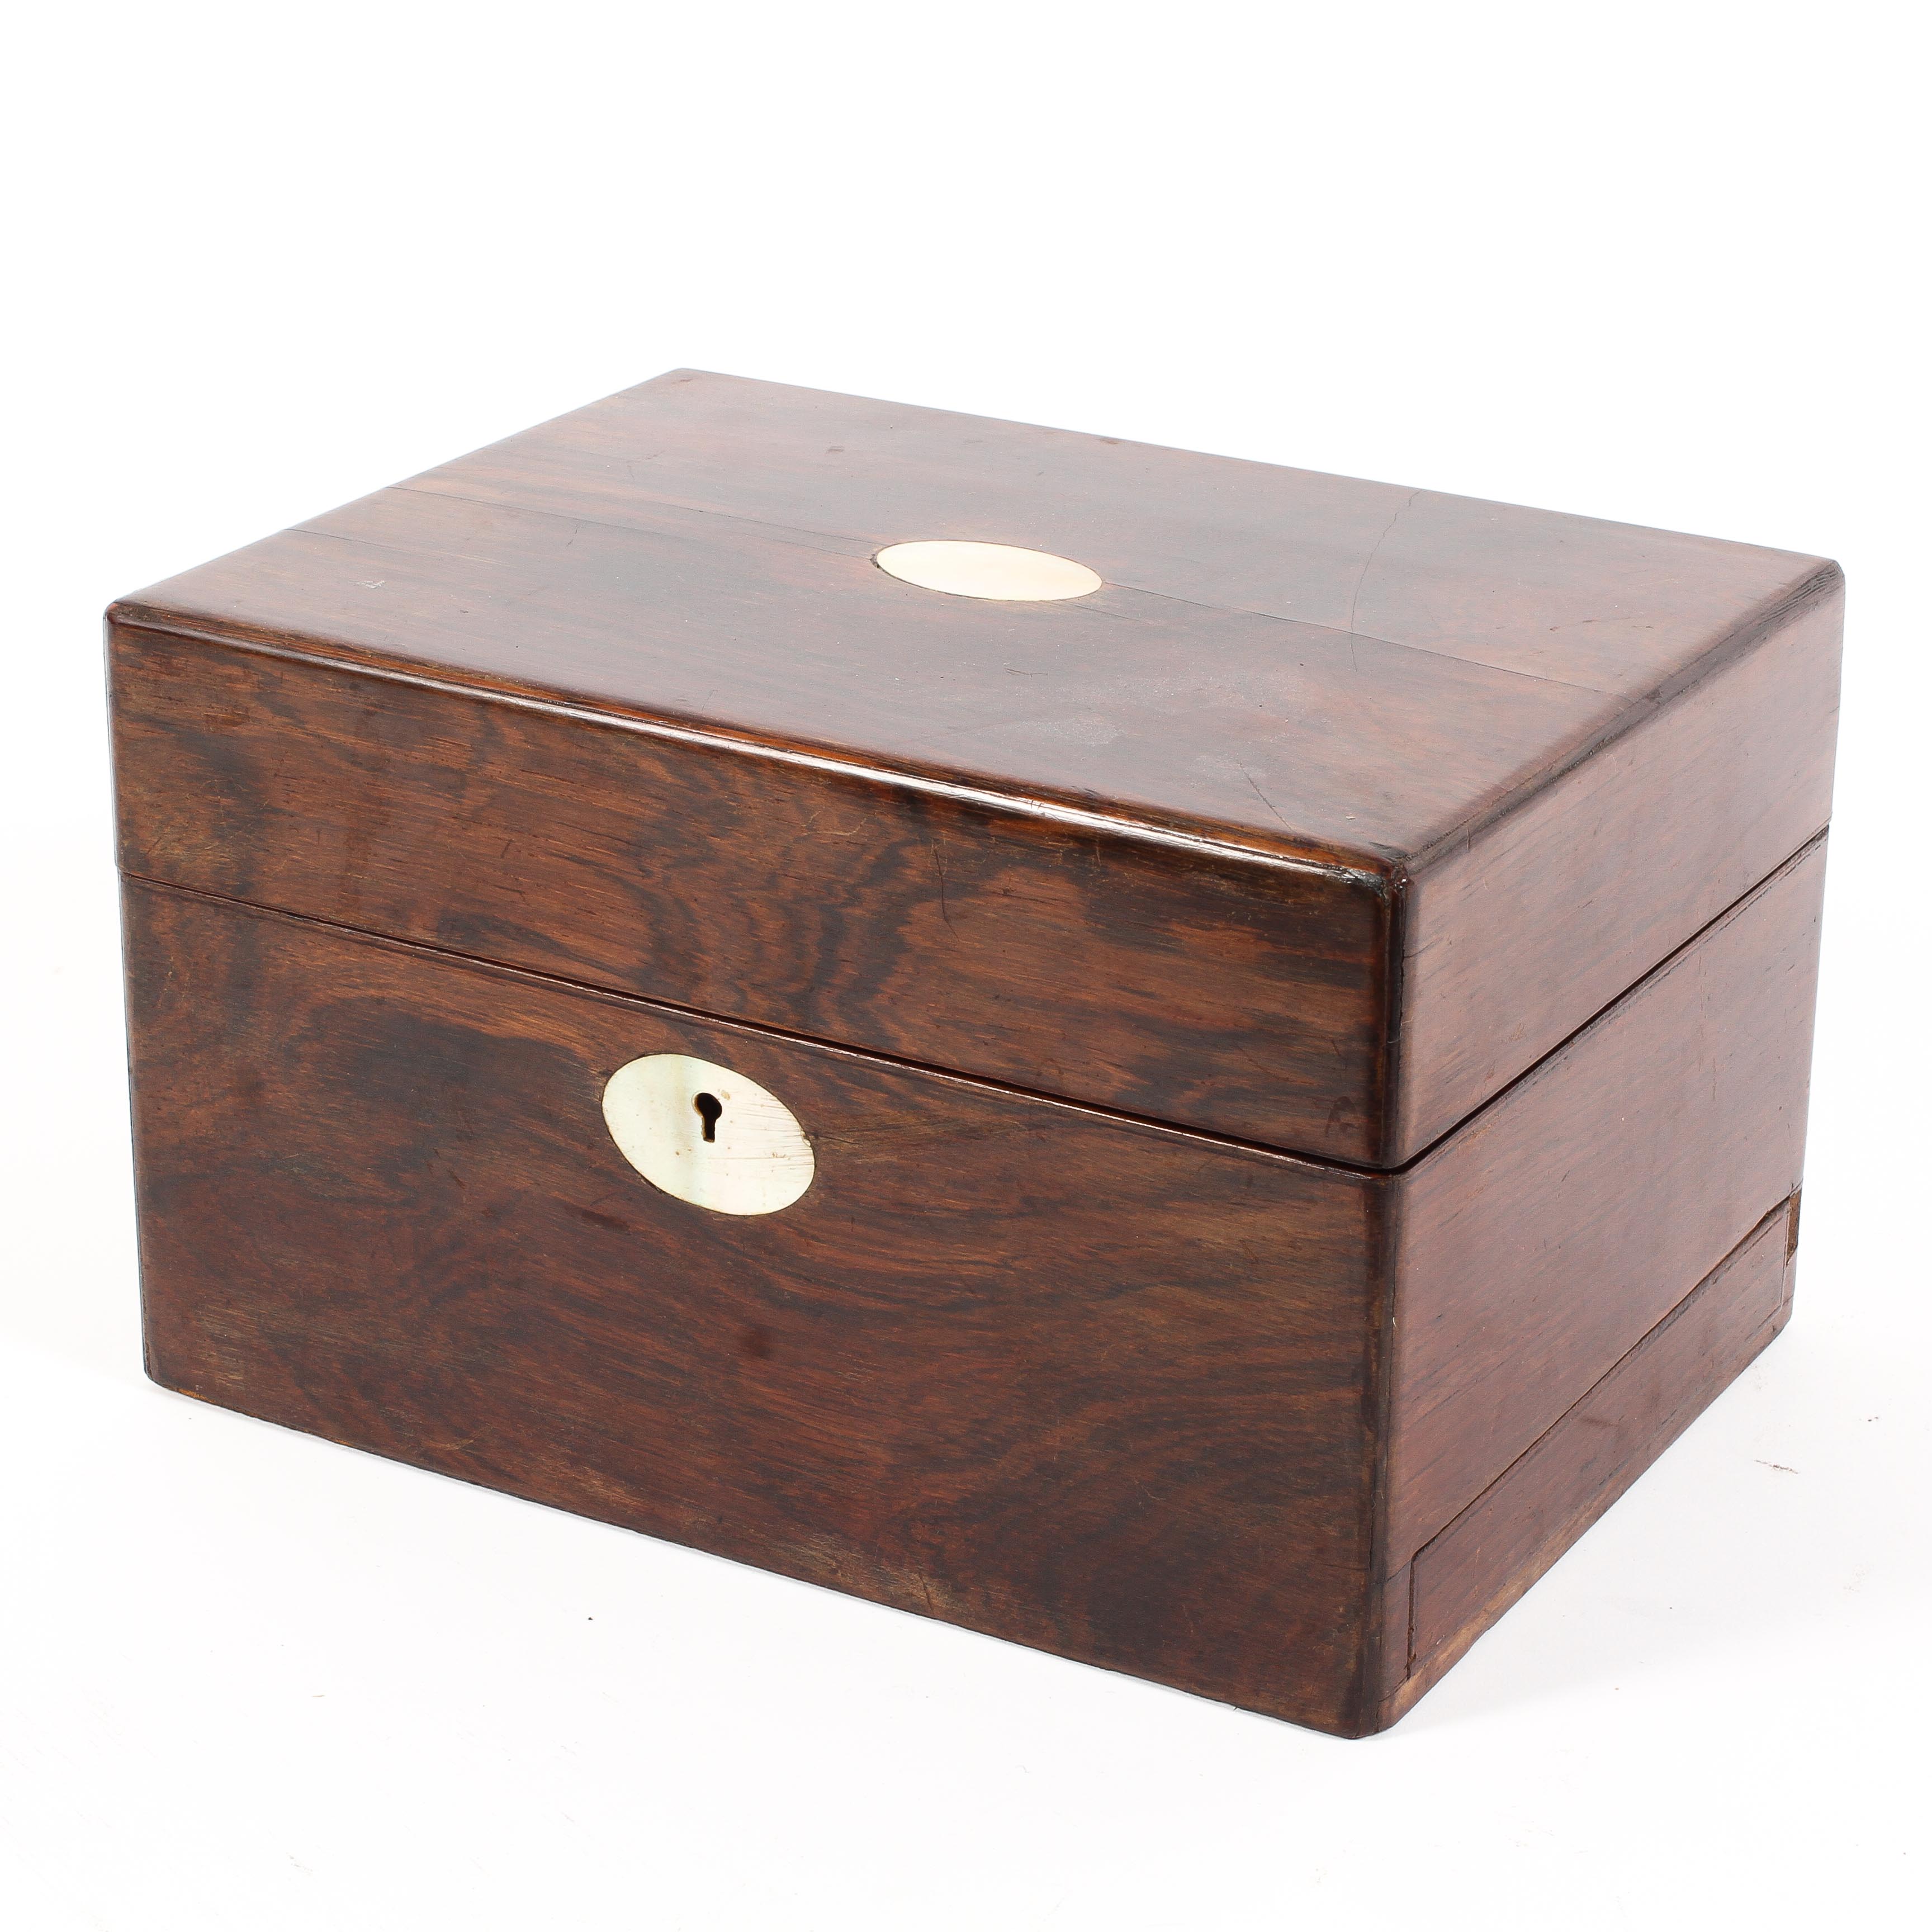 A Rosewood jewellery box with mother of pearl inlay, - Image 3 of 3